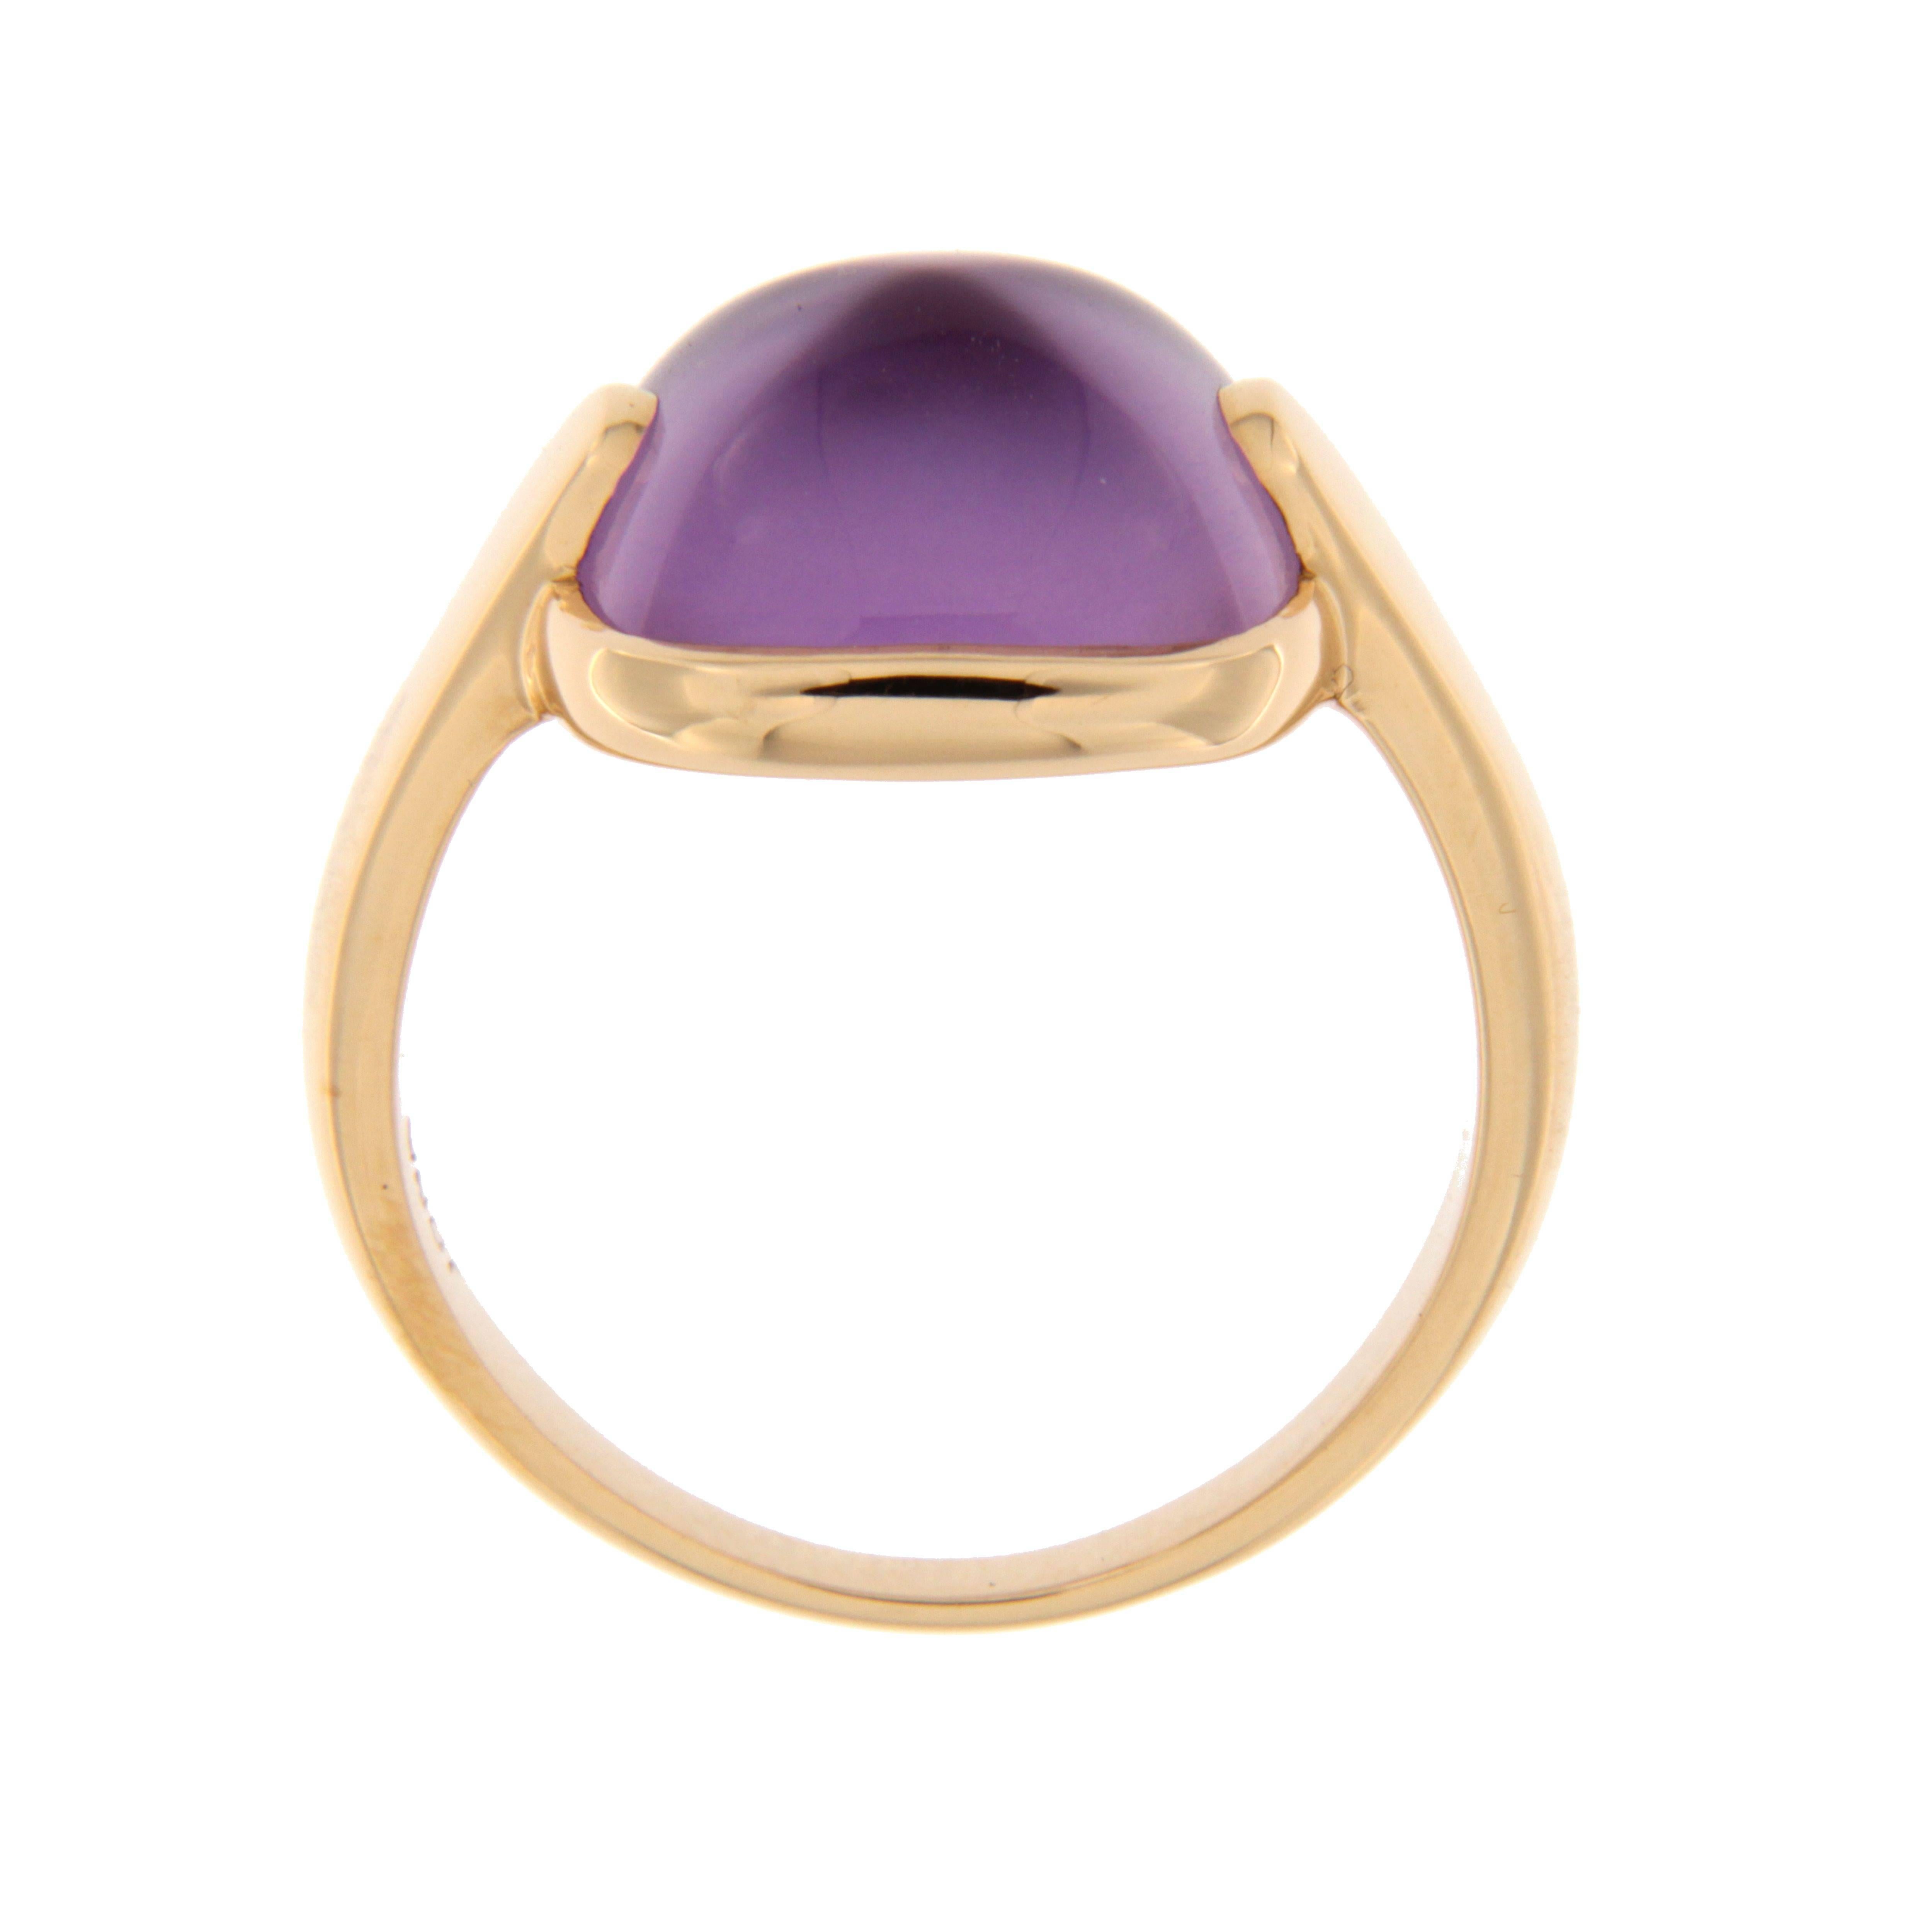 Jona design collection, hand crafted in Italy, 18 karat rose gold ring set with a sugar loaf cabochon cut amethyst on mother of pearl weighing 6.8 carats.
US size 5.75, EU size 11.5. Can be sized to any specification.

All Jona jewelry is new and